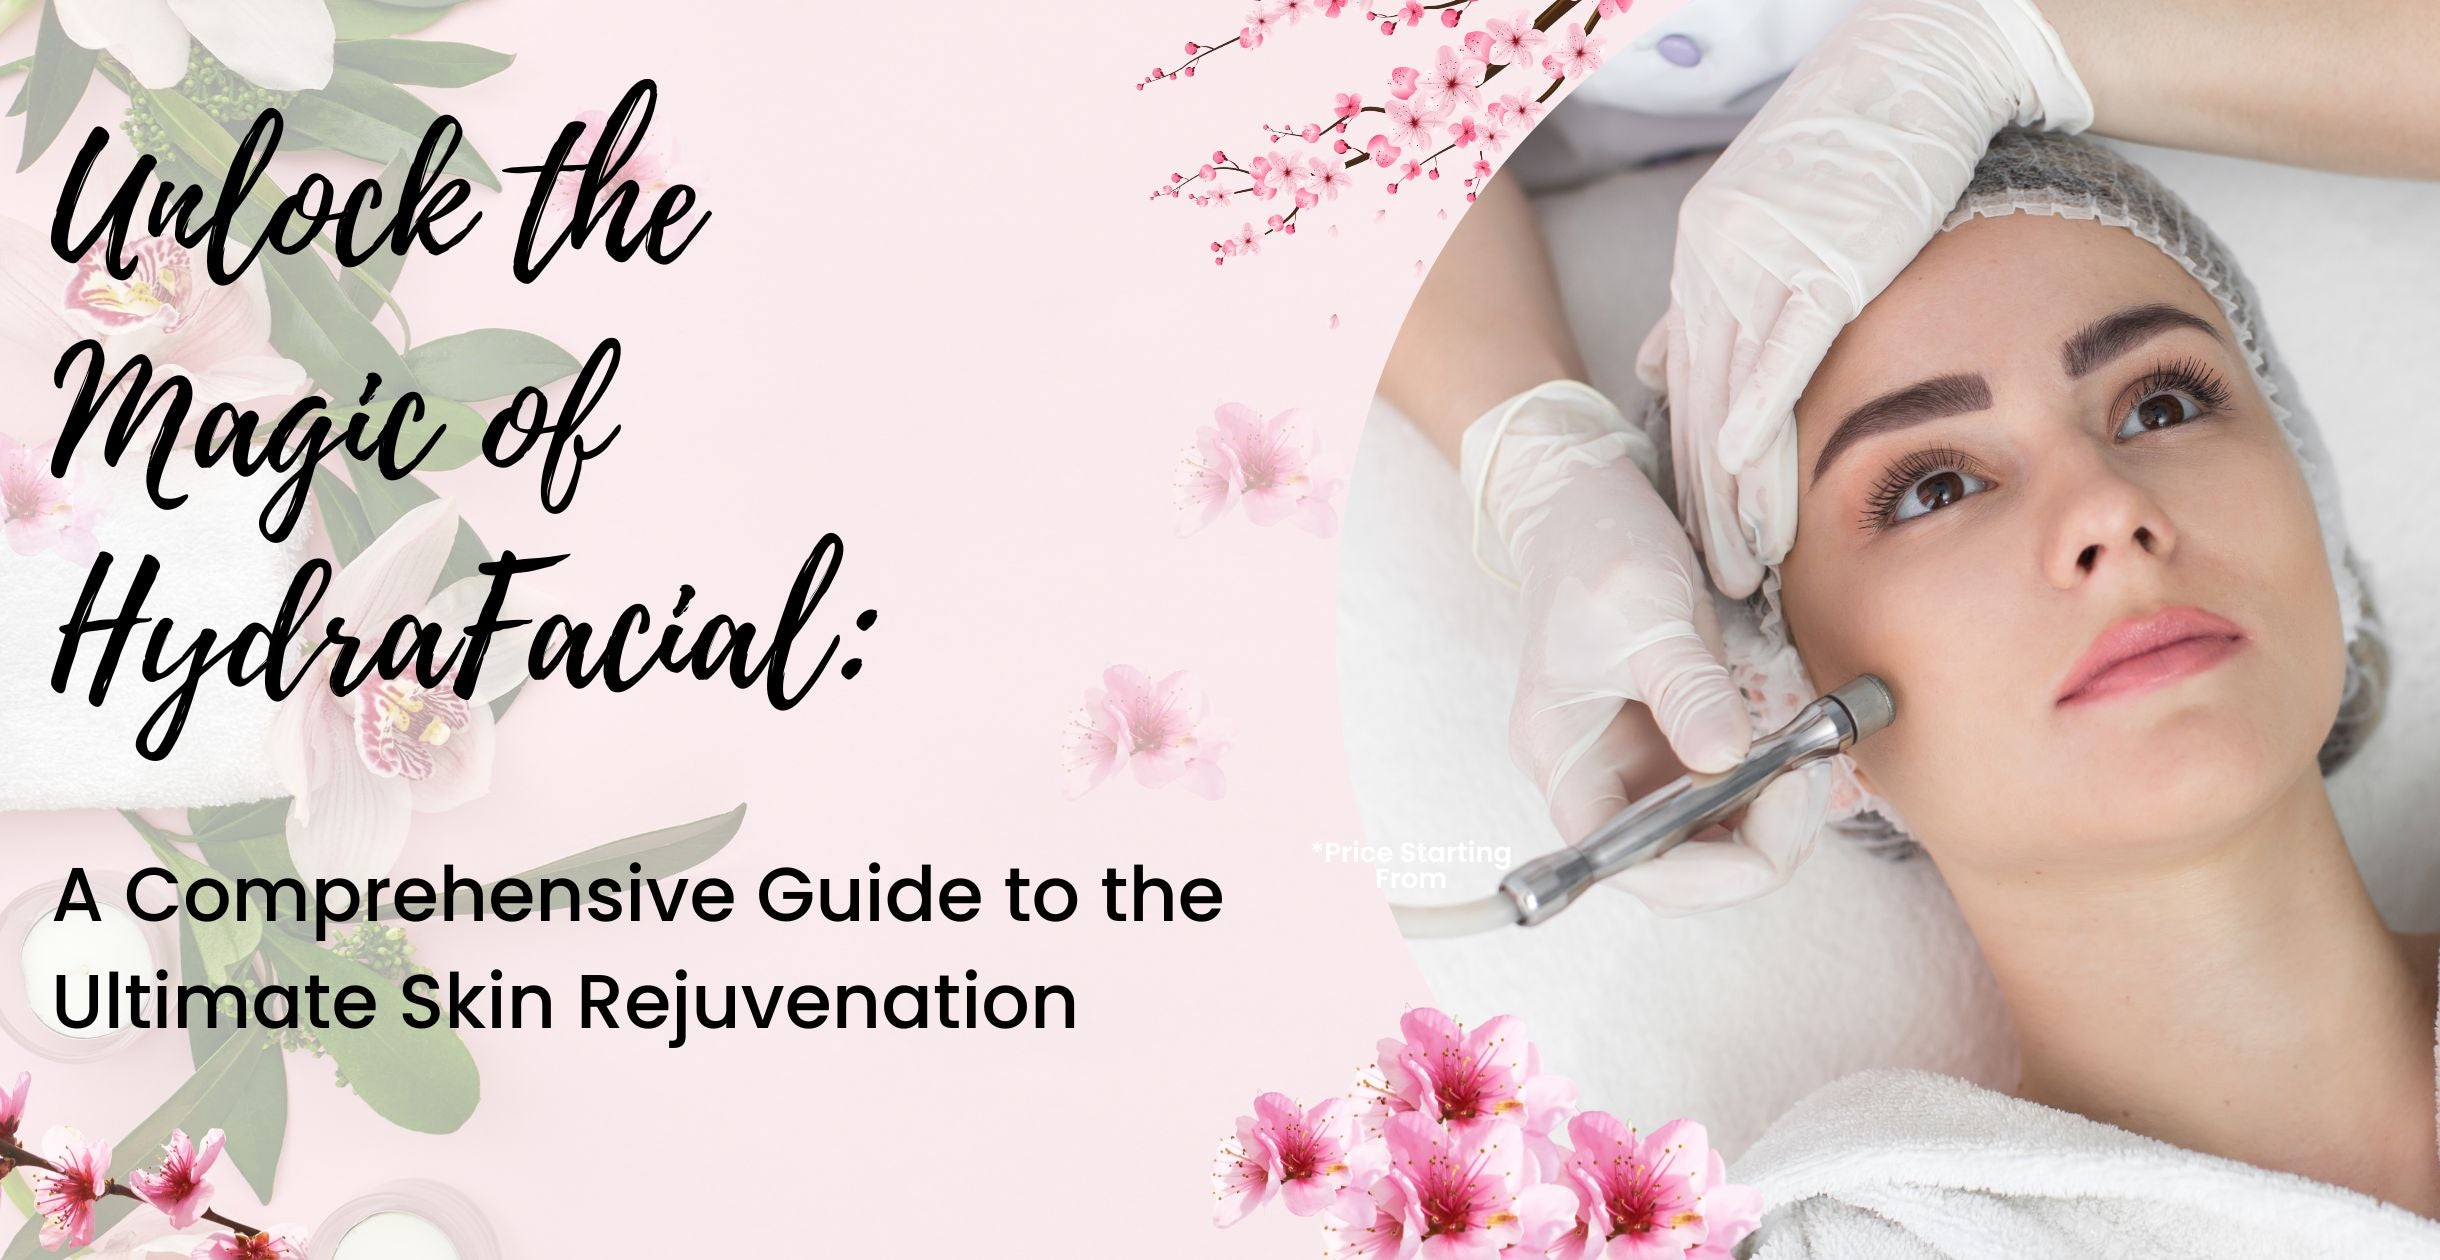 Unlock the Magic of HydraFacial: A Comprehensive Guide to the Ultimate Skin Rejuvenation